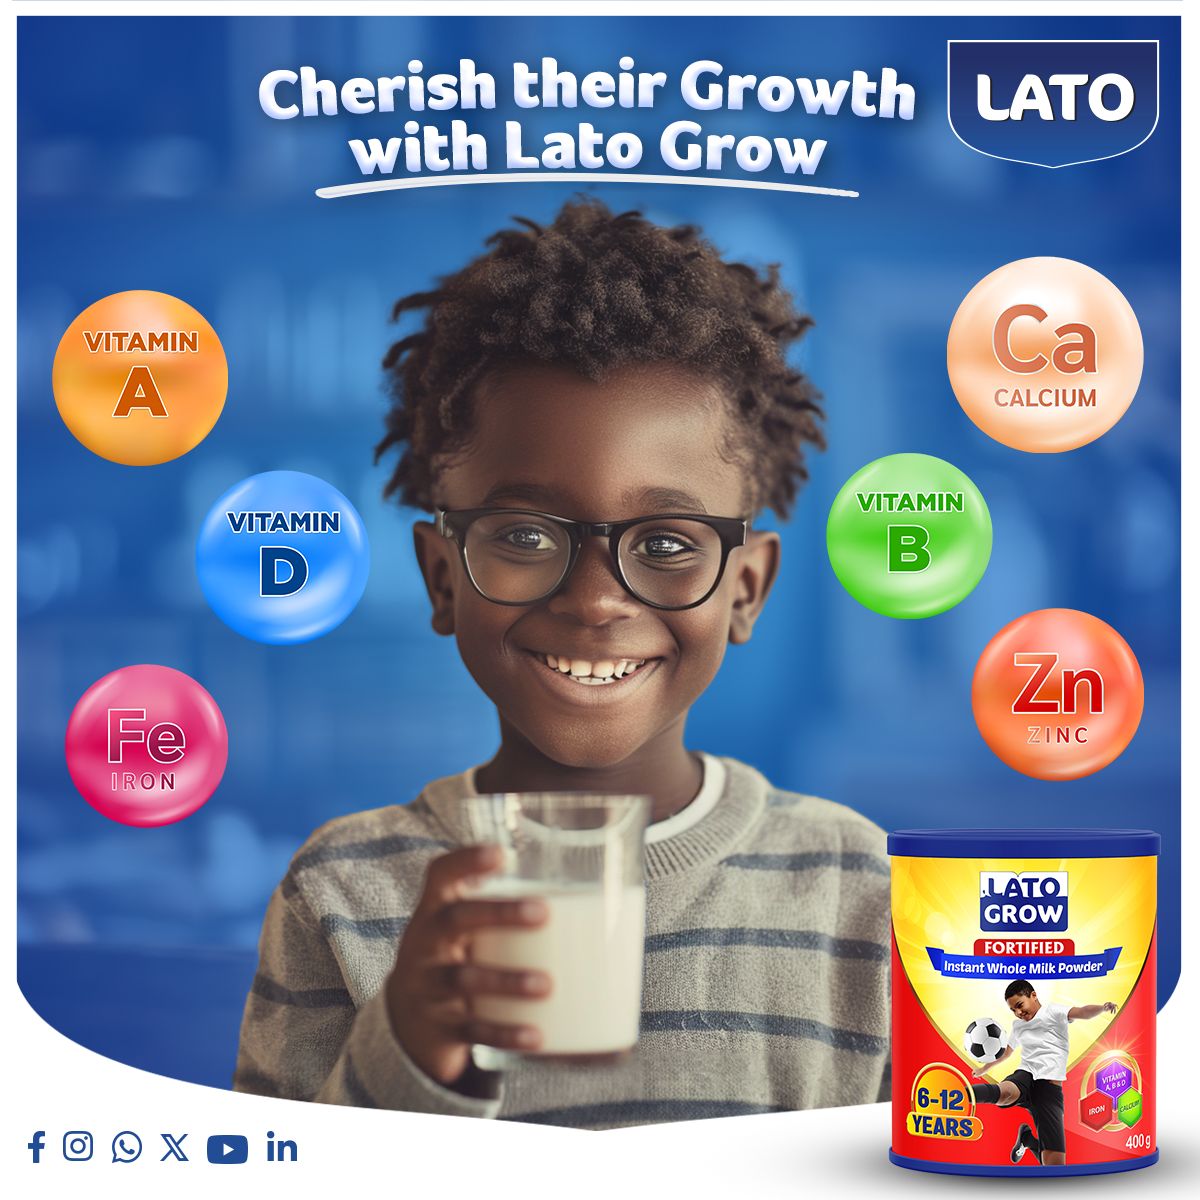 This #ChildNutritionMonth, nourish your 6-12 year old with Lato Grow Fortified Milk Powder! Packed with iron, calcium, vitamins A & D for strong bodies & bright minds. #GrowingUpHealthy #LatoGrow